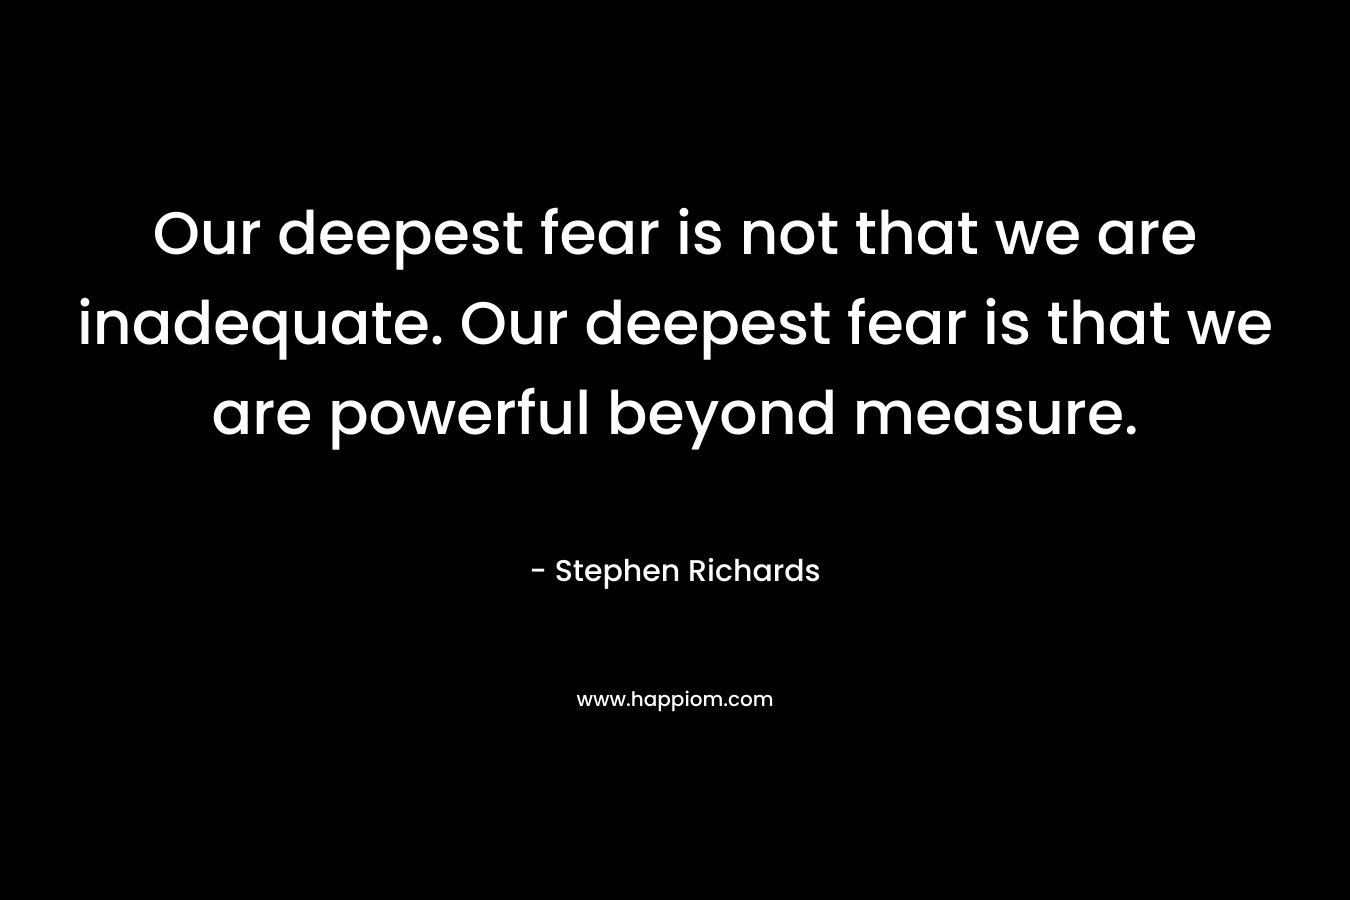 Our deepest fear is not that we are inadequate. Our deepest fear is that we are powerful beyond measure. – Stephen Richards